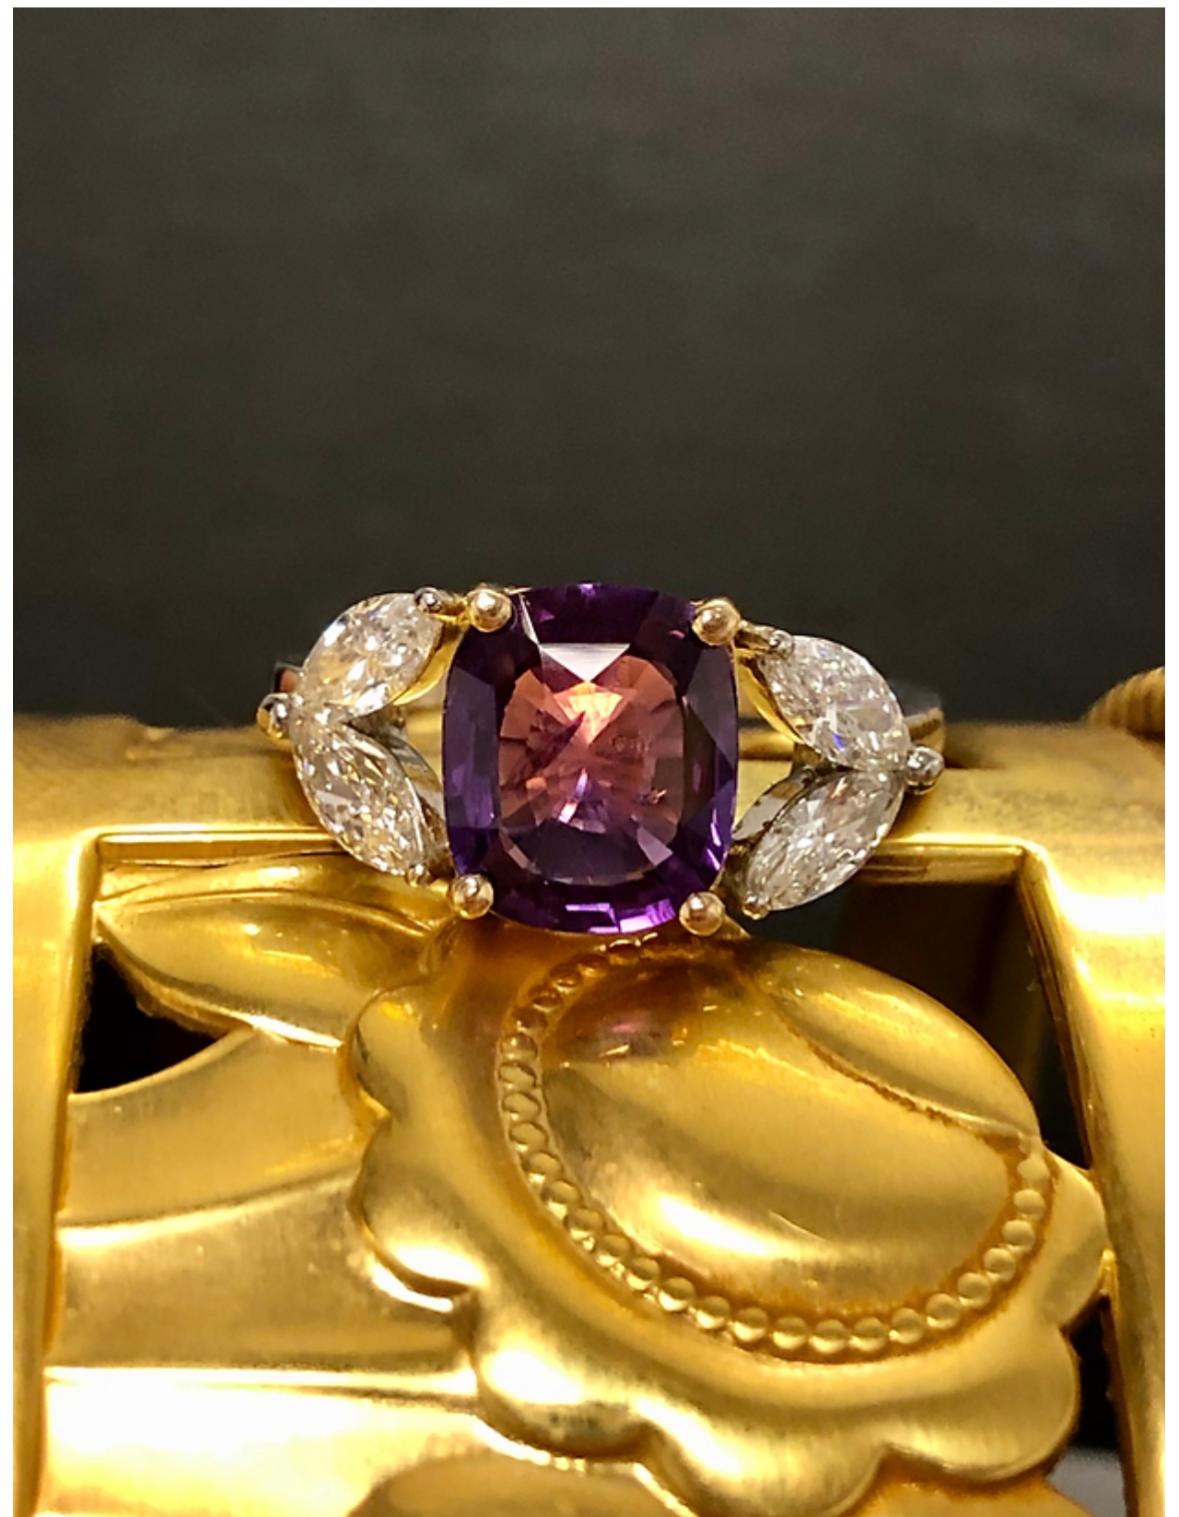 A beautifully made ring done in platinum and 18K centered by a 3.81ct natural cushion cut “no heat” deep purple sapphire (GIA report included in the sale) flanked by 4 marquise diamonds being G-H color and Vs1-Vs2 clarity with a total approximate